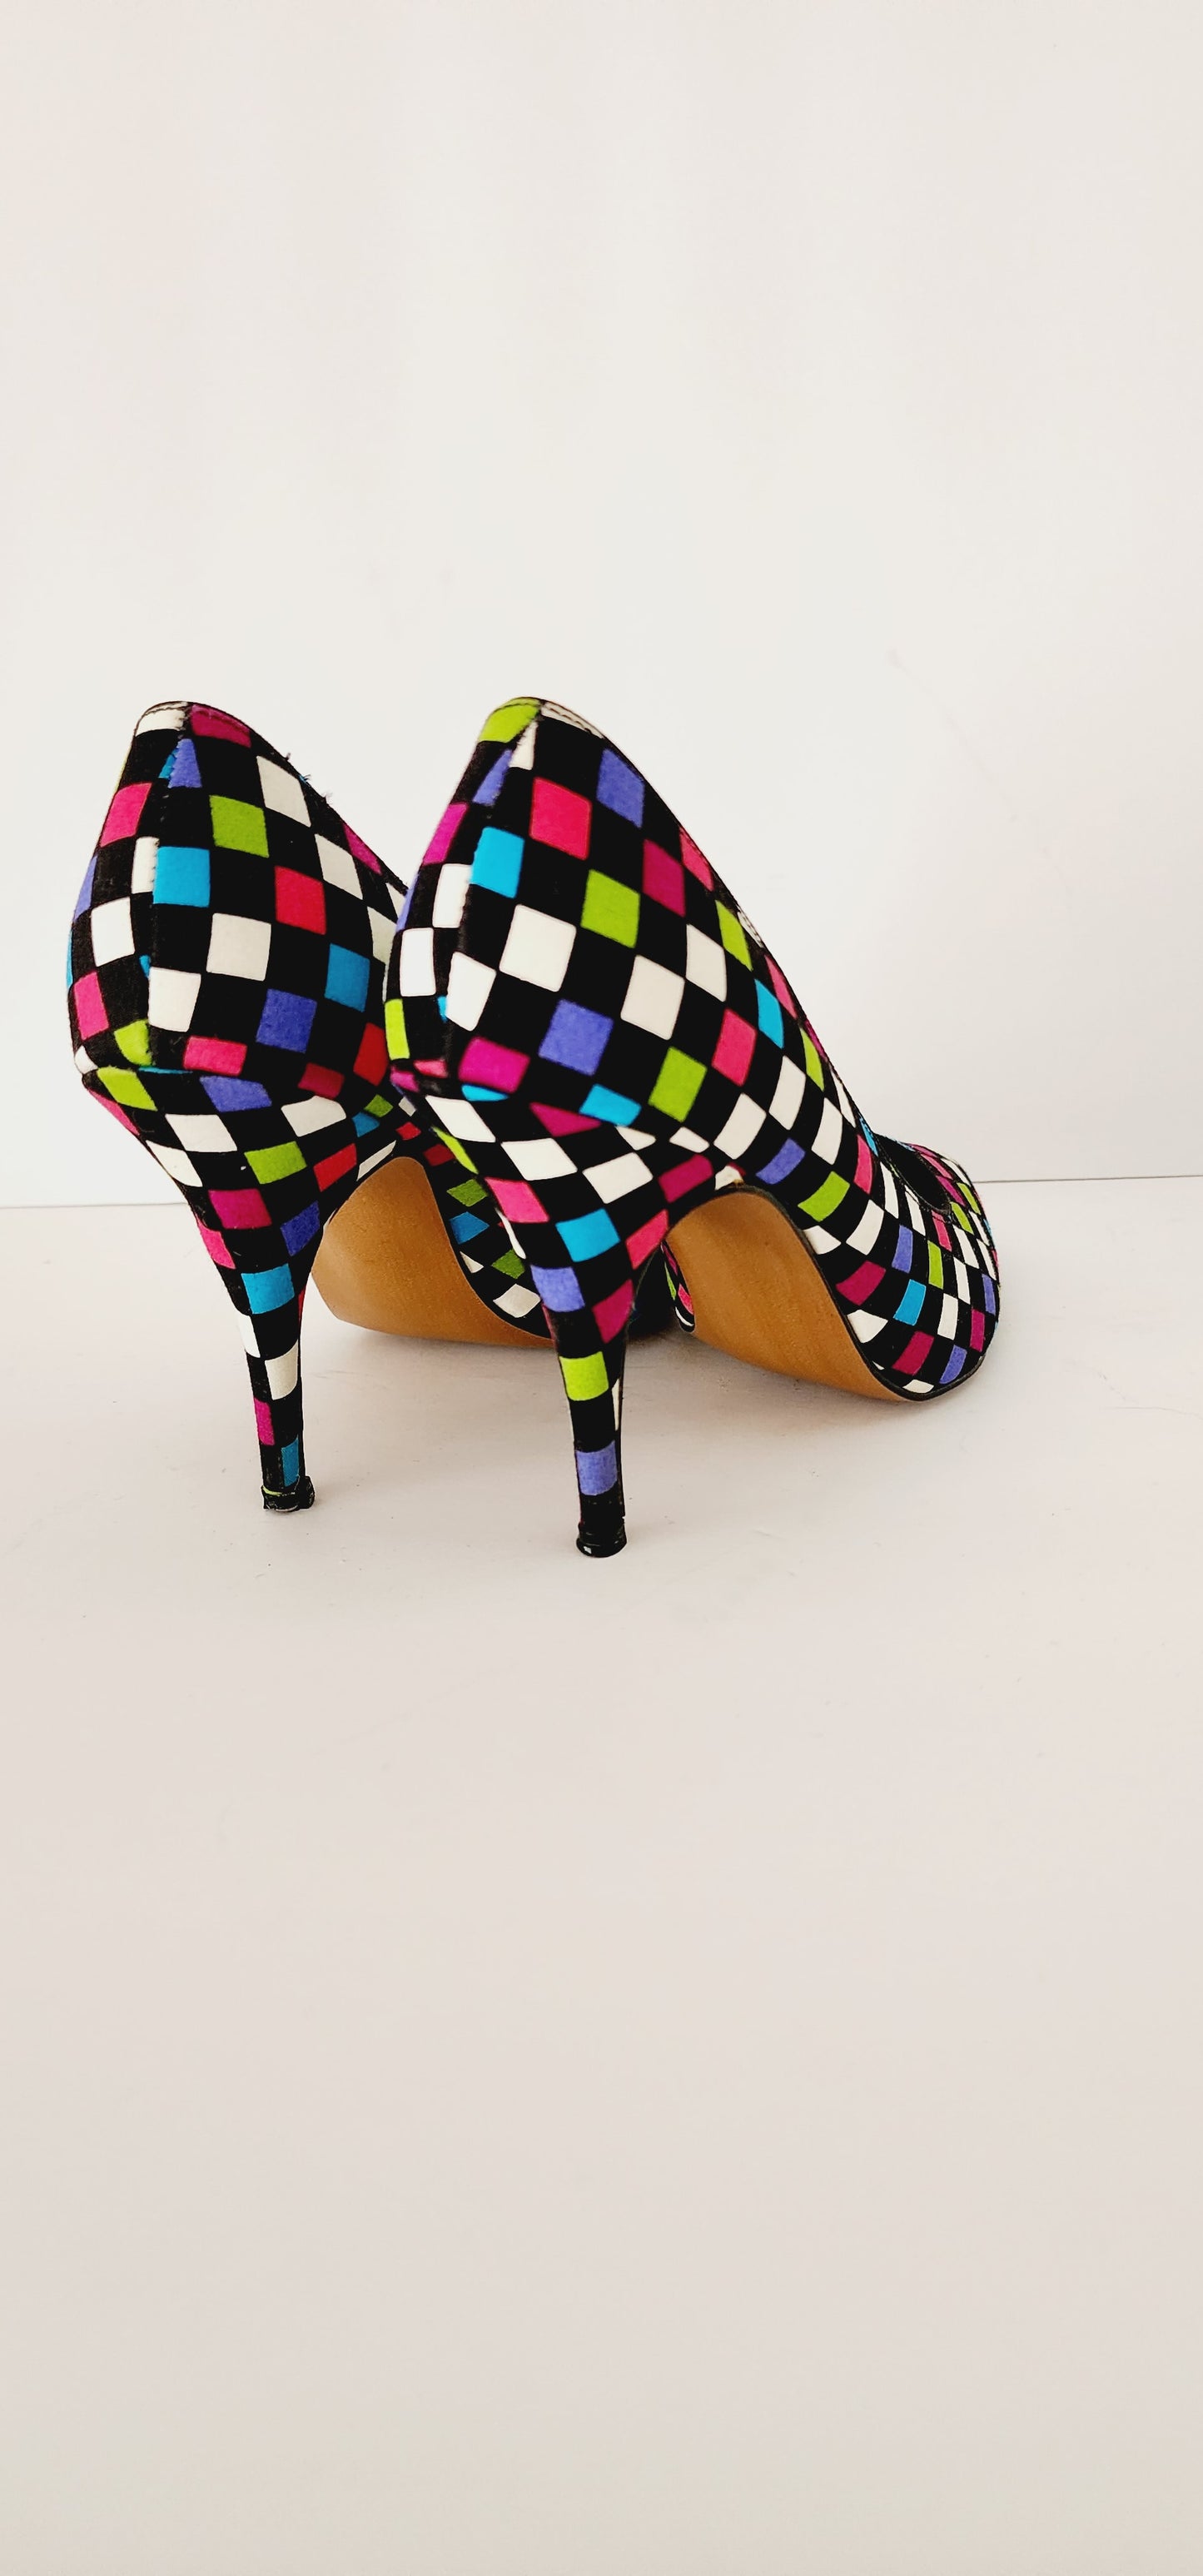 1980s High Heel Shoes Colorful Checked Print Pumps Fredericks of Hollywood size 8.5